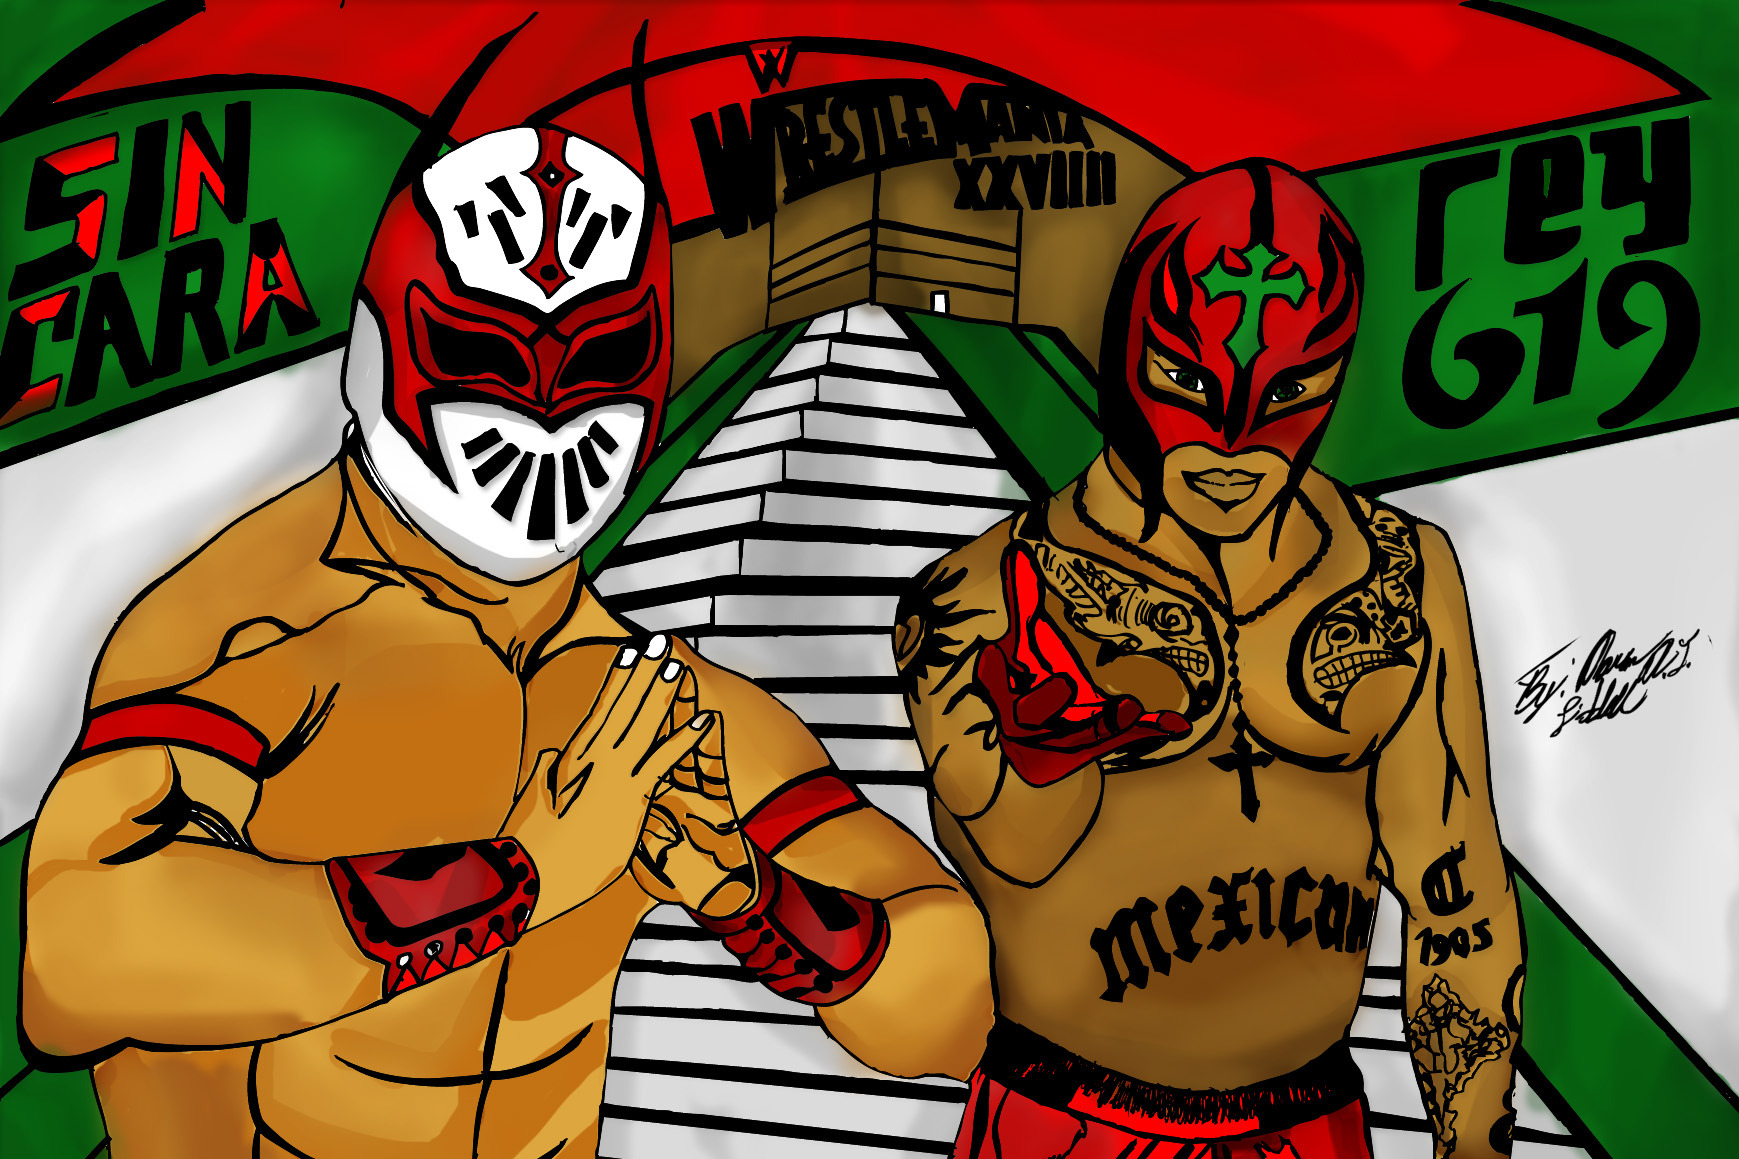 drawing of rey mysterio